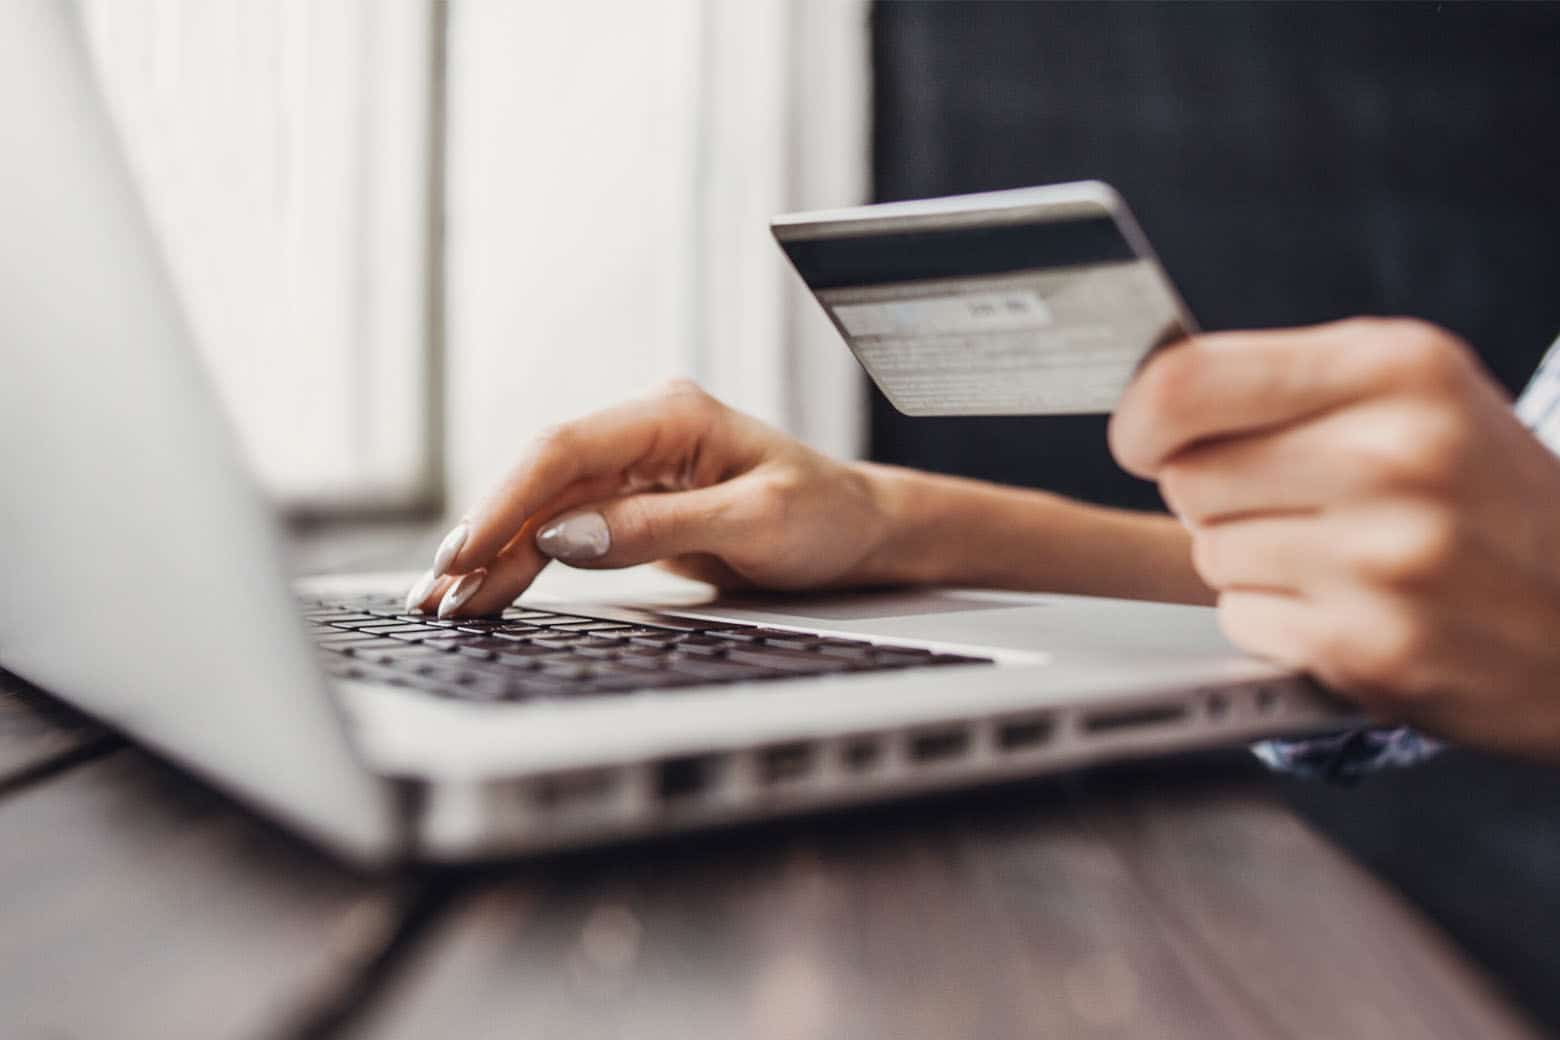 Only 24 percent of companies in a recent Robert Half Technology survey said they block access to online shopping sites. But nearly 70 percent of companies said they monitor employees' online buying habits at work. (Thinkstock)